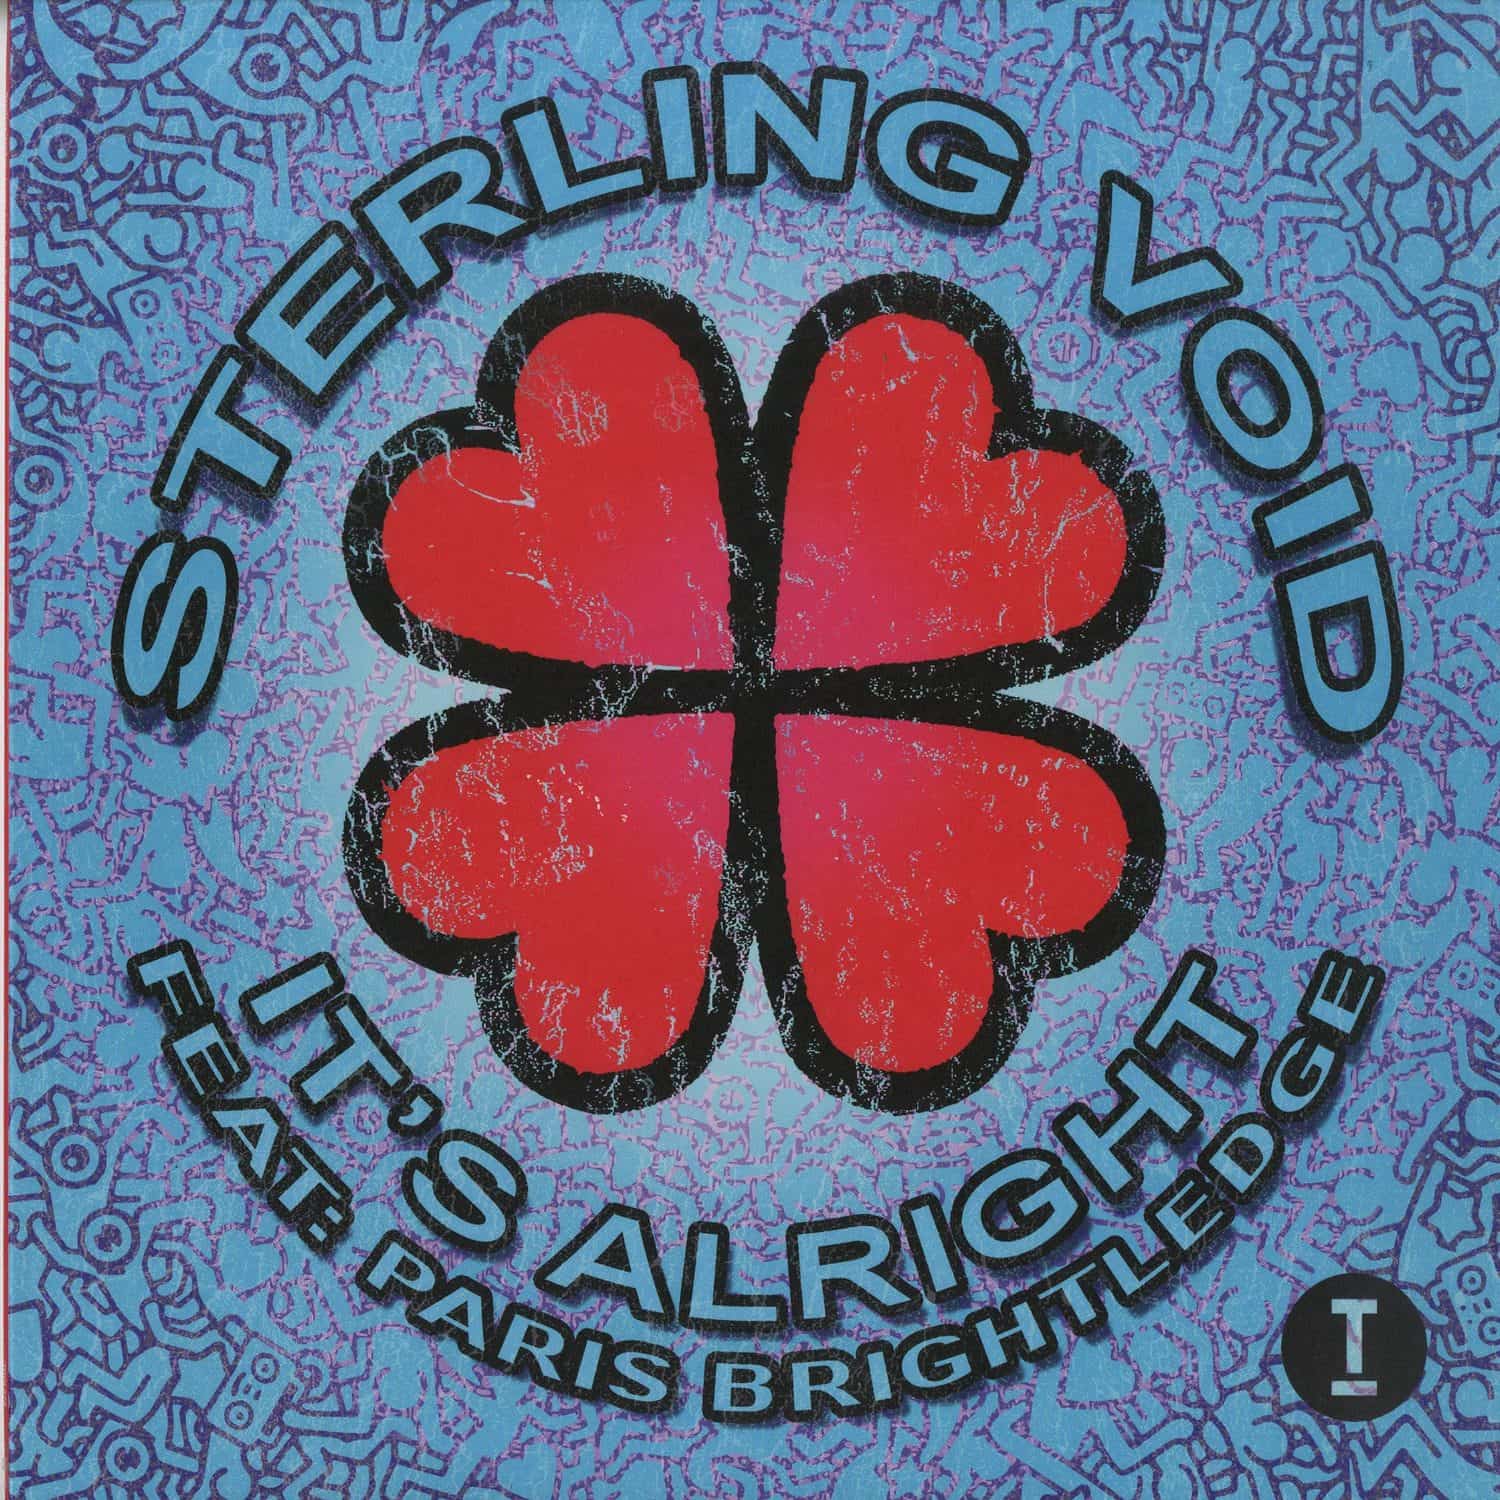 Sterling Void ft. Paris Brightledge - ITS ALRIGHT